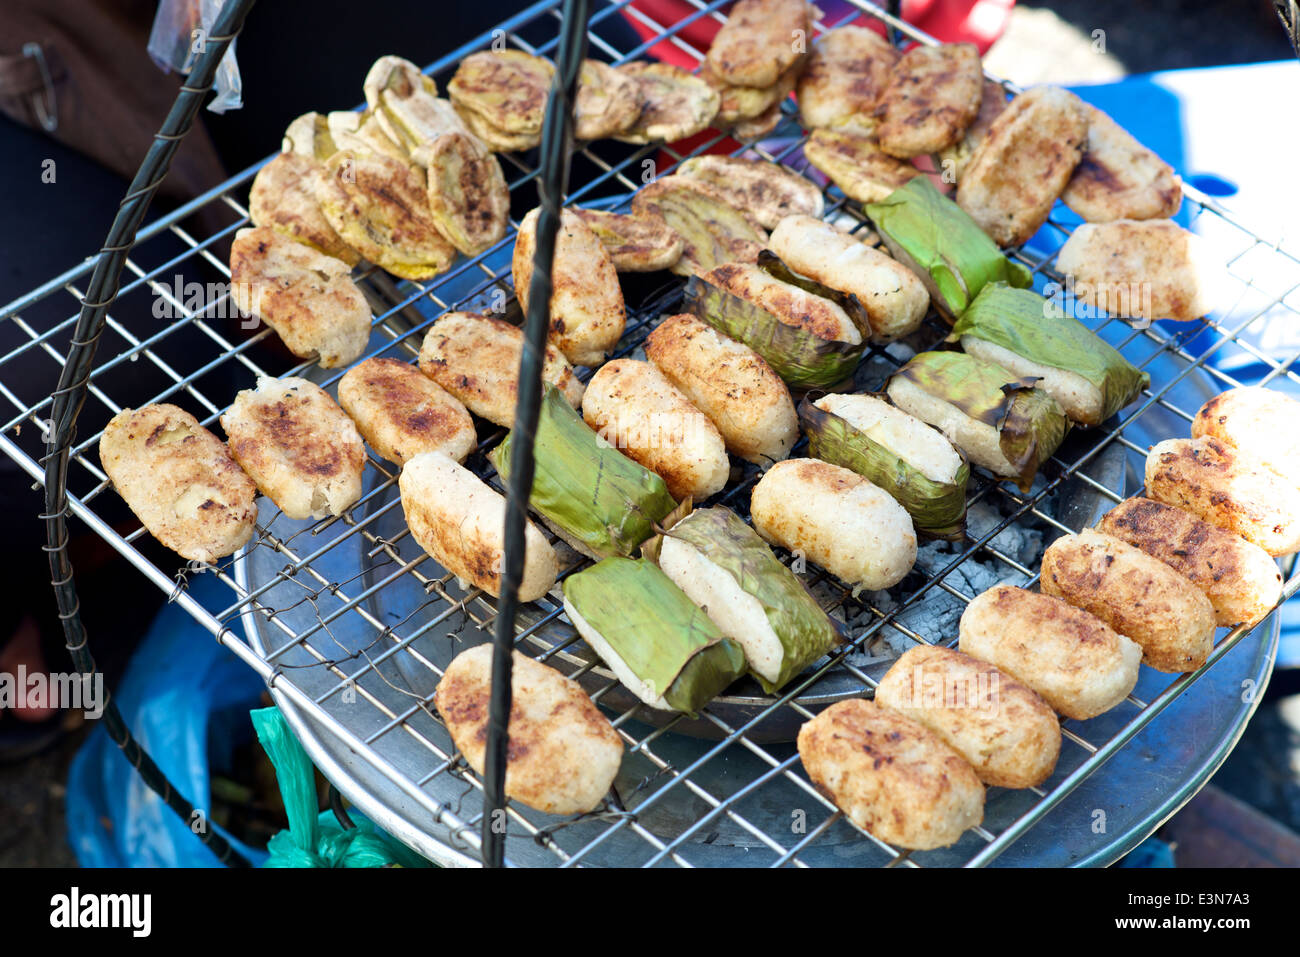 Vietnamese specialty Banana Rice Cake wrapped in leaves grilled Stock Photo